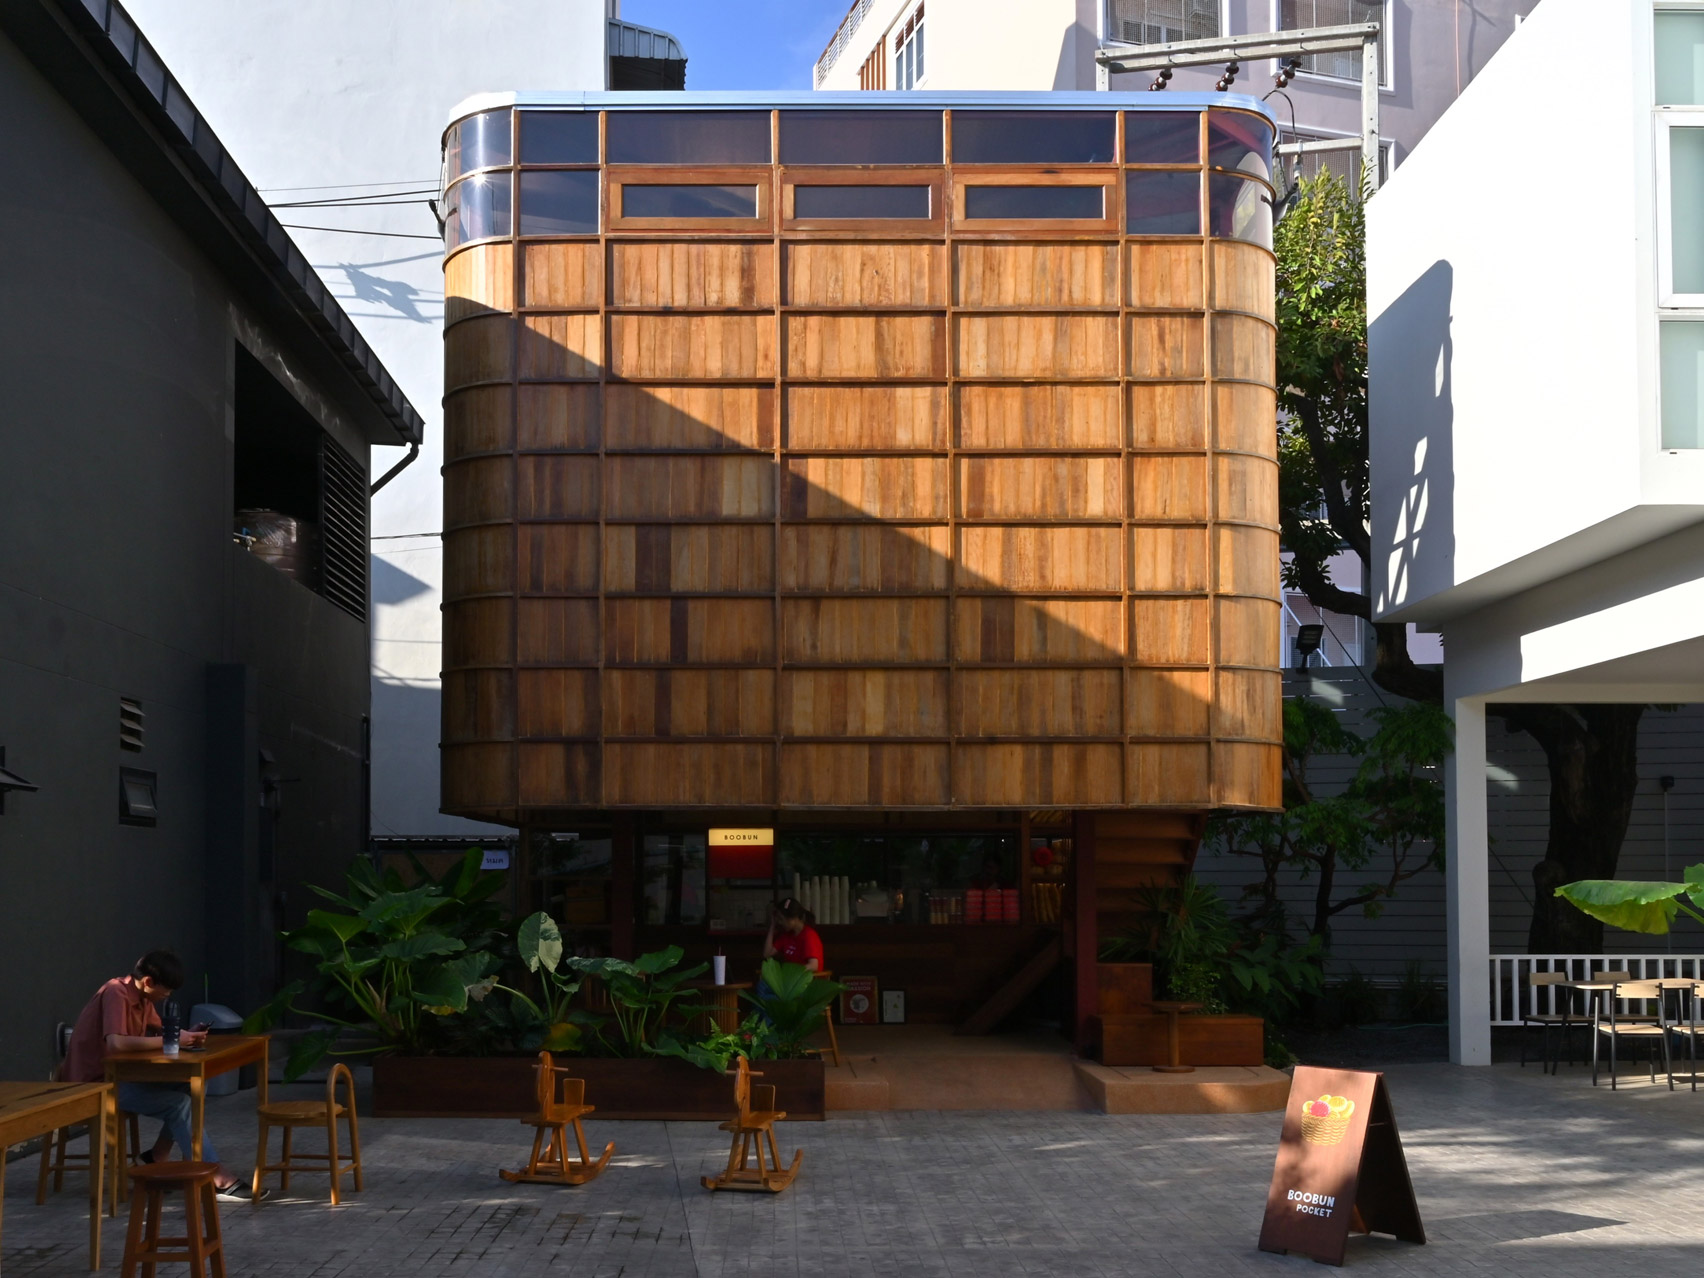 Front elevation of Boobun Pocket Cafe by CUP Scale Studio